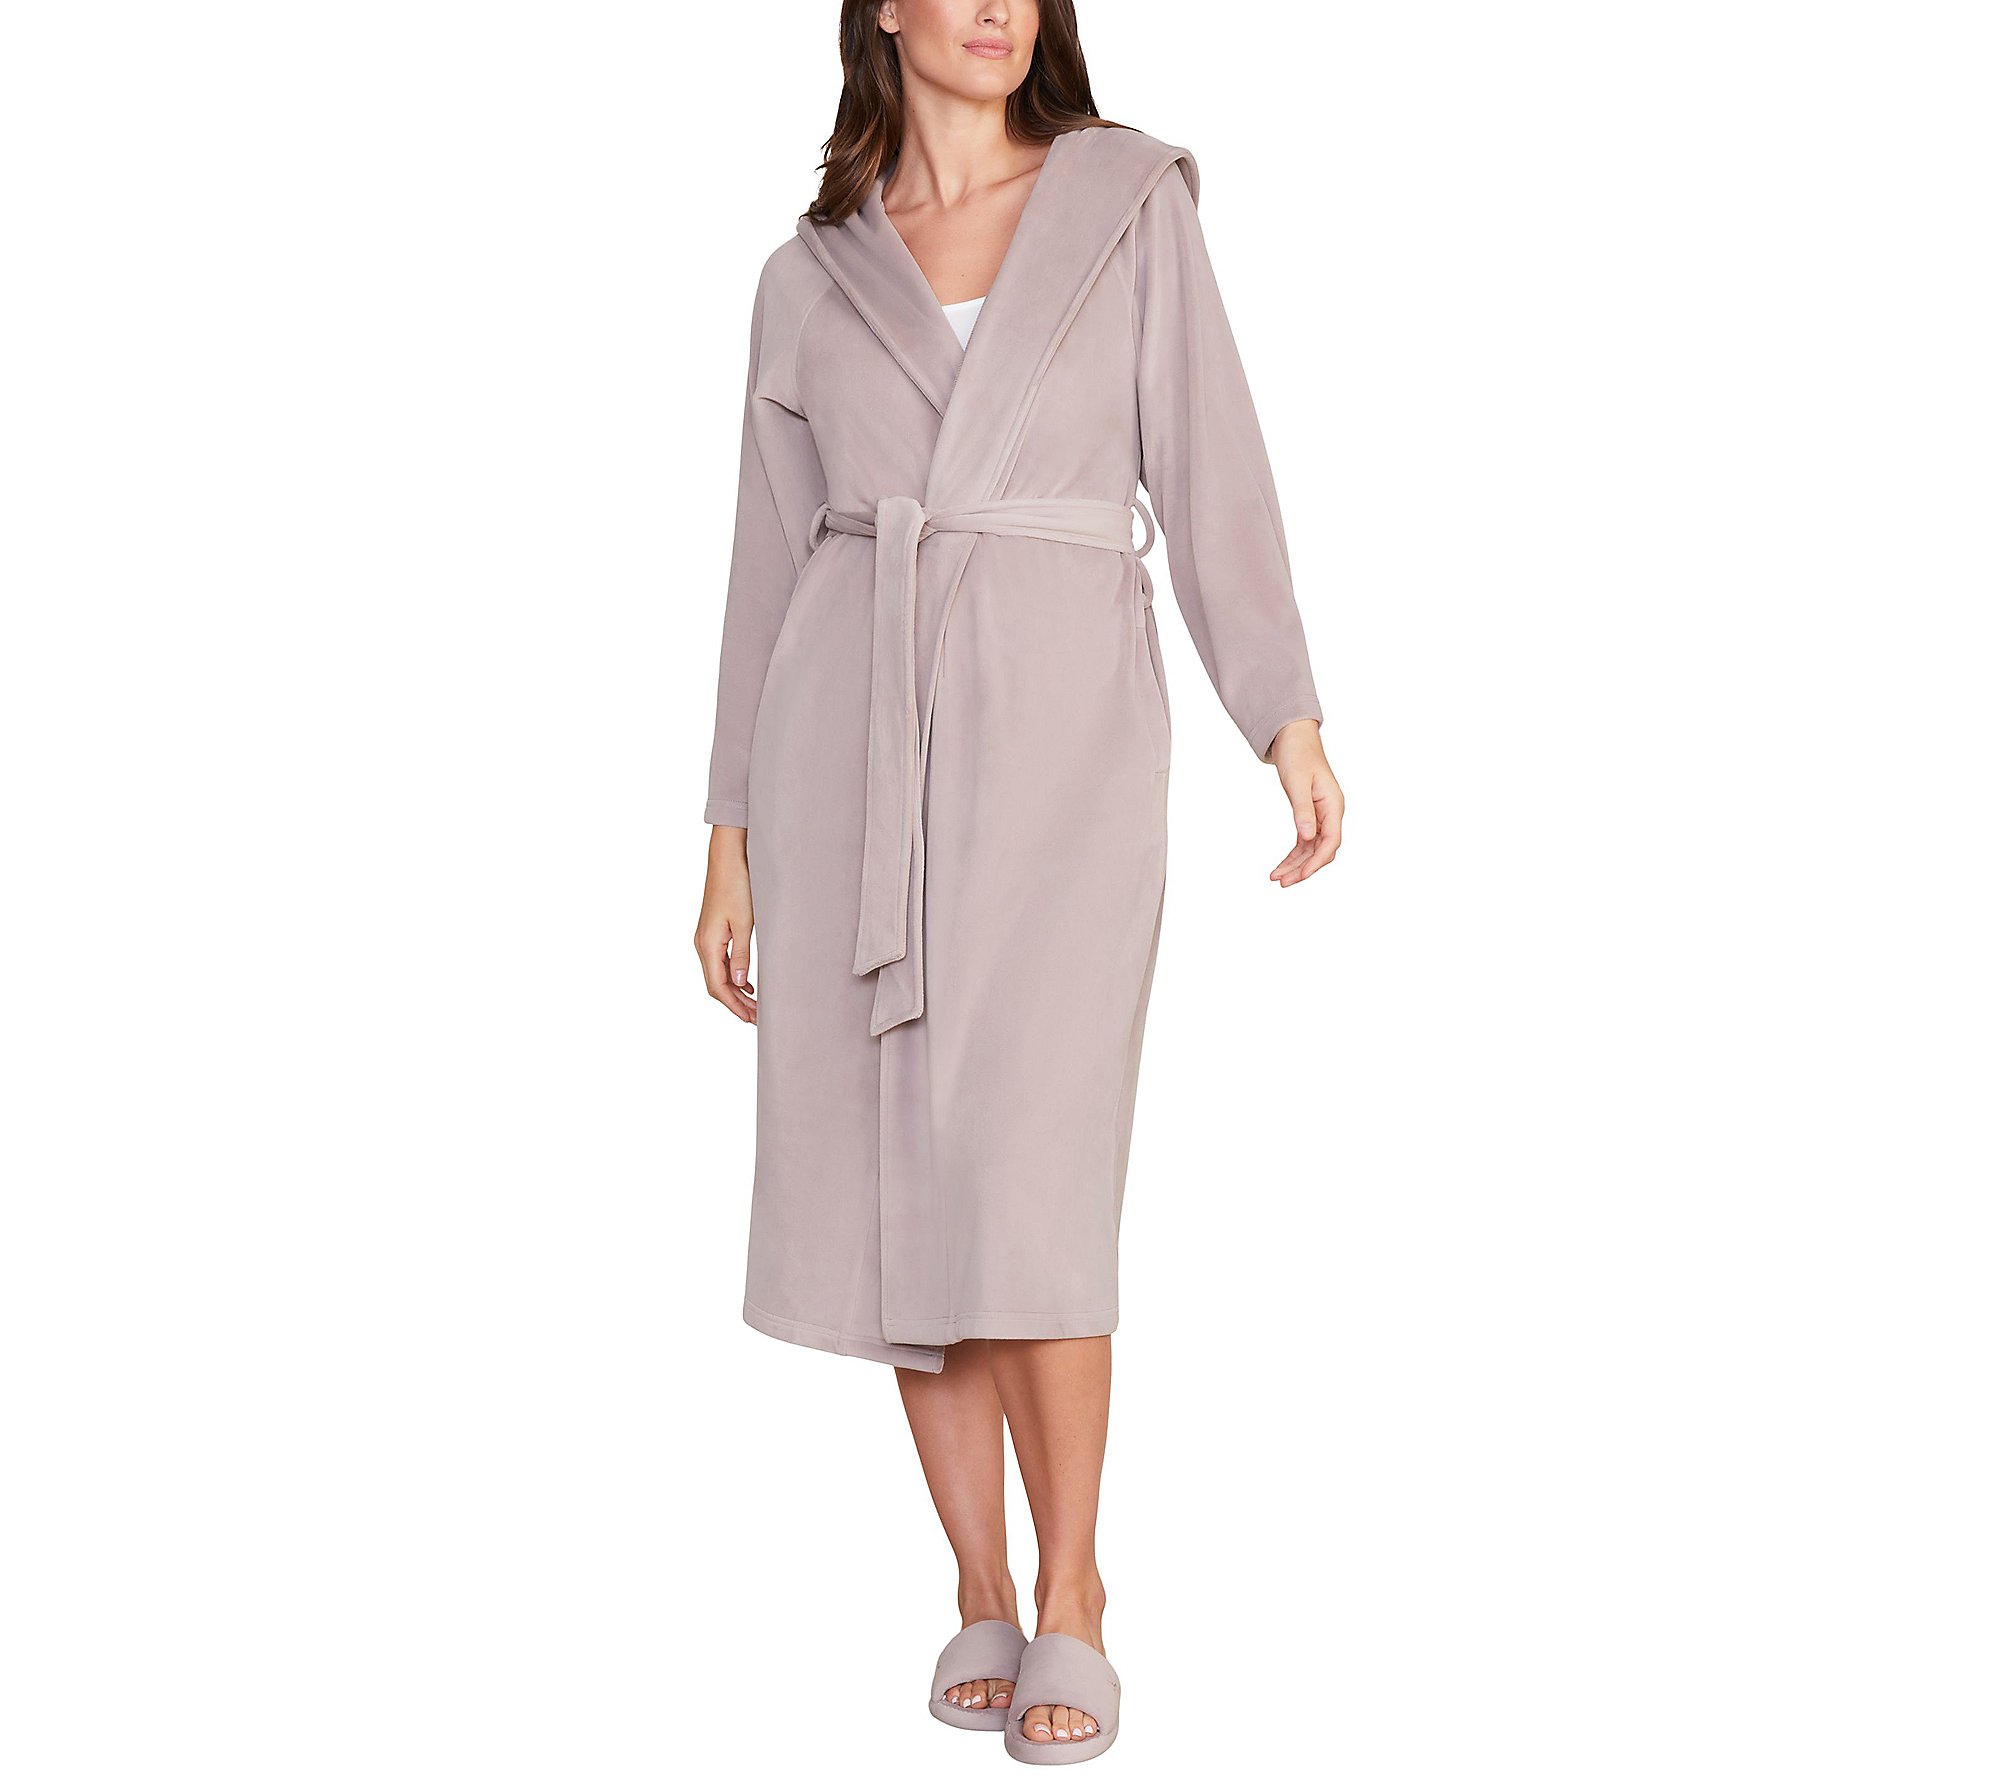 Barefoot Dreams LuxeChic Hooded Robe